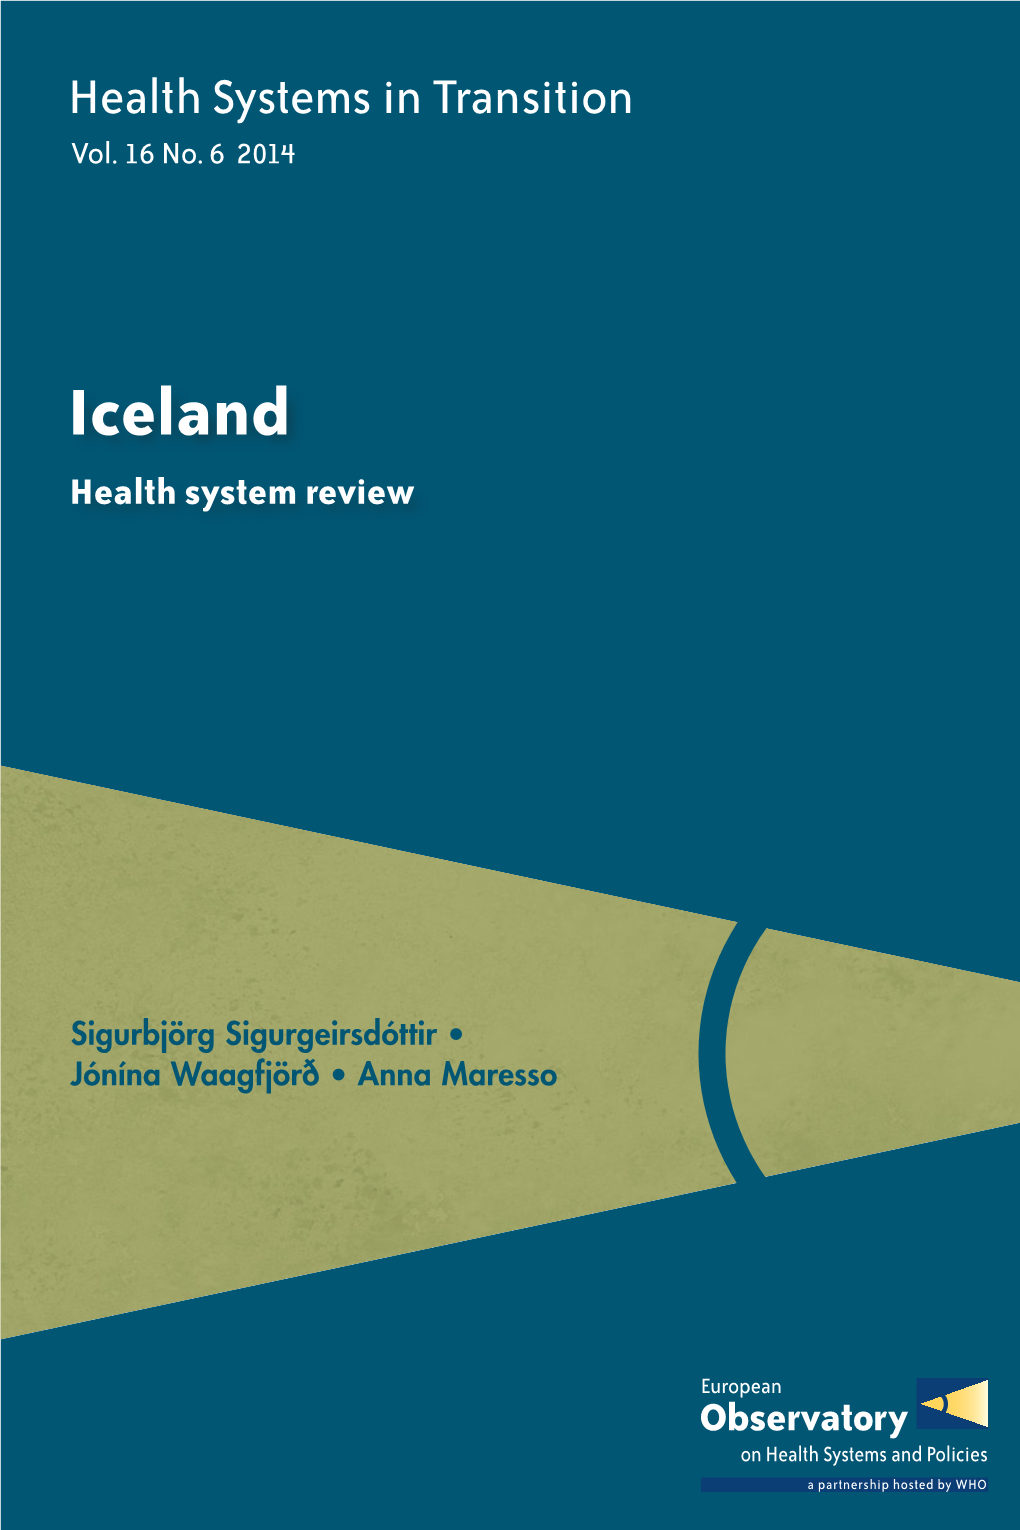 Health Systems in Transition Iceland